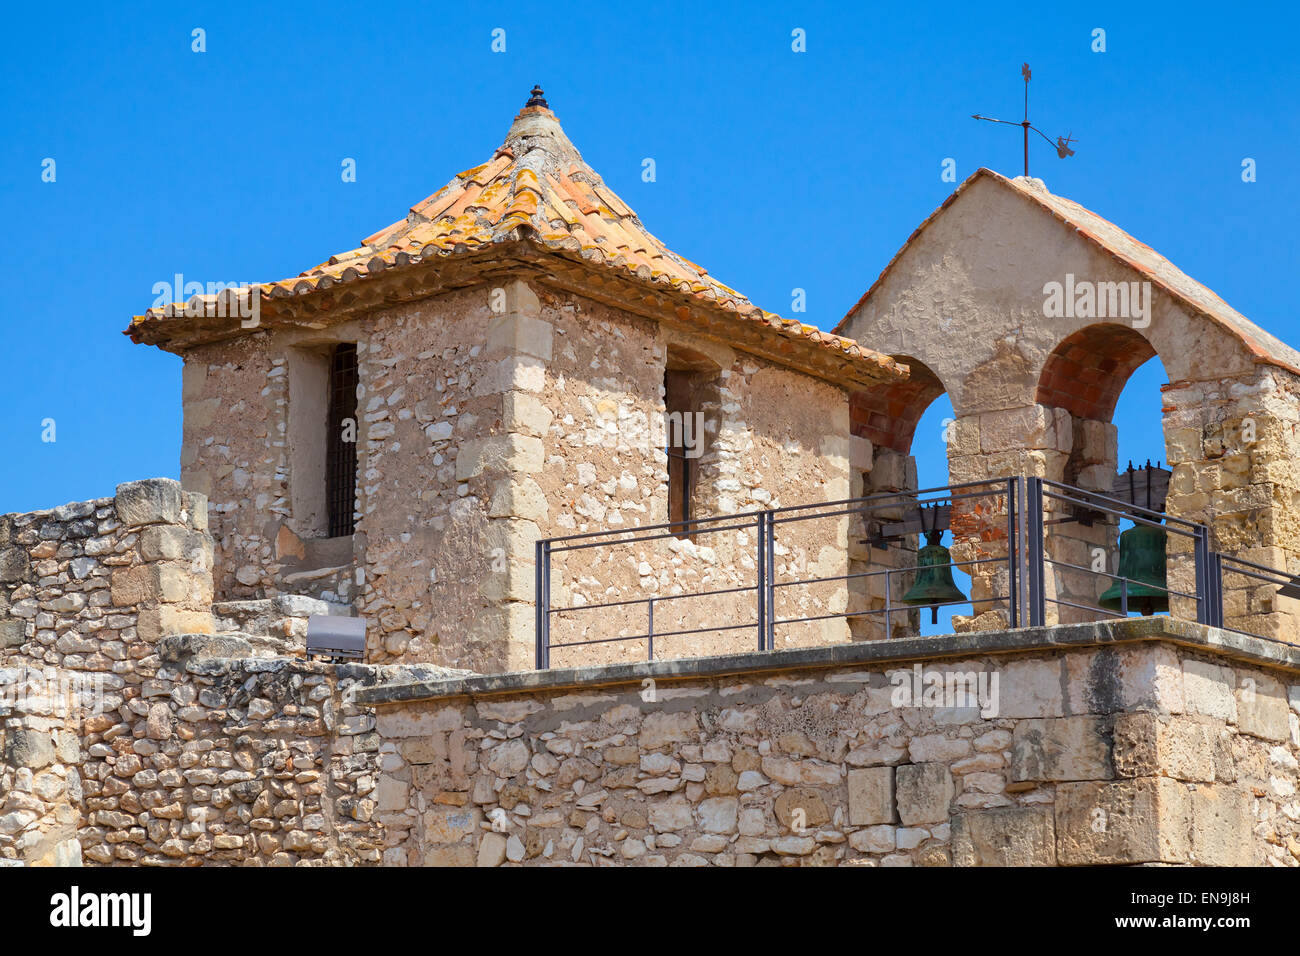 Medieval stone castle in Calafell town, Spain Stock Photo